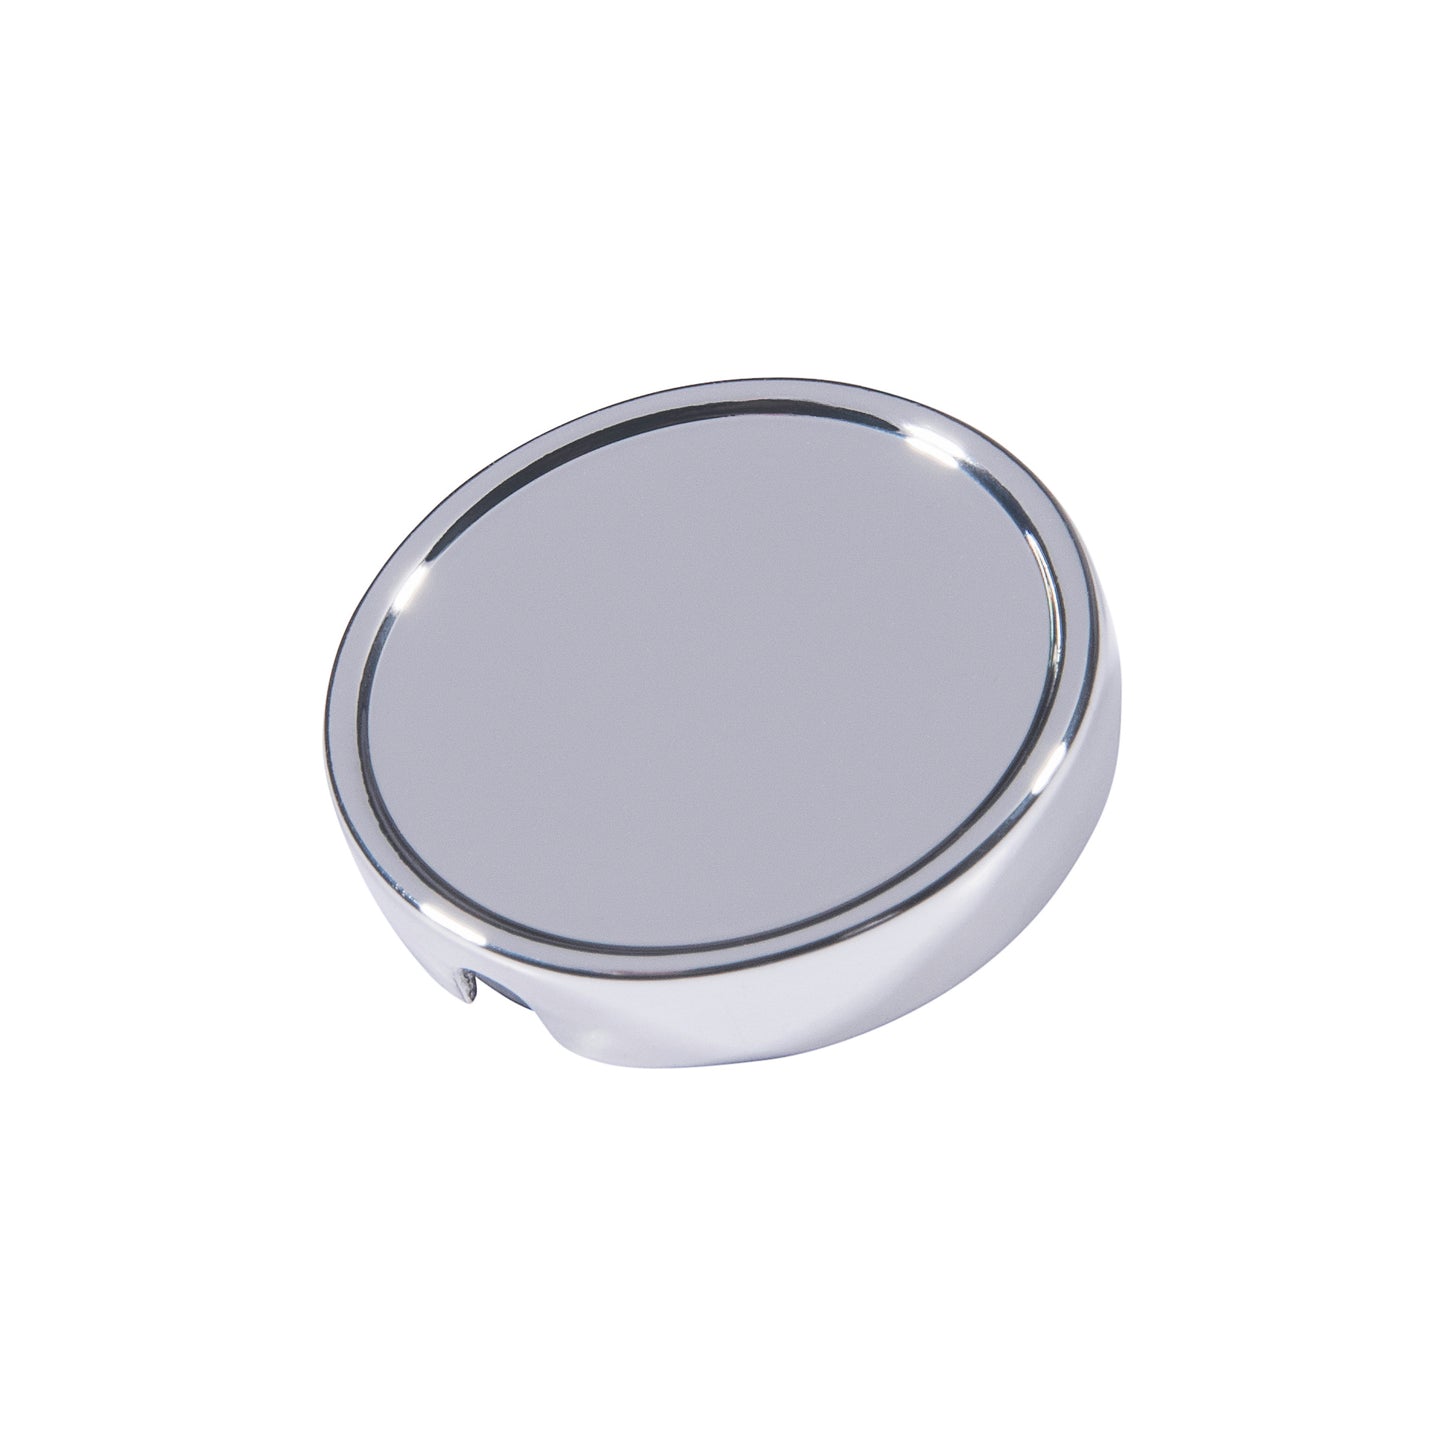 21mm button in customizable shiny silver metal